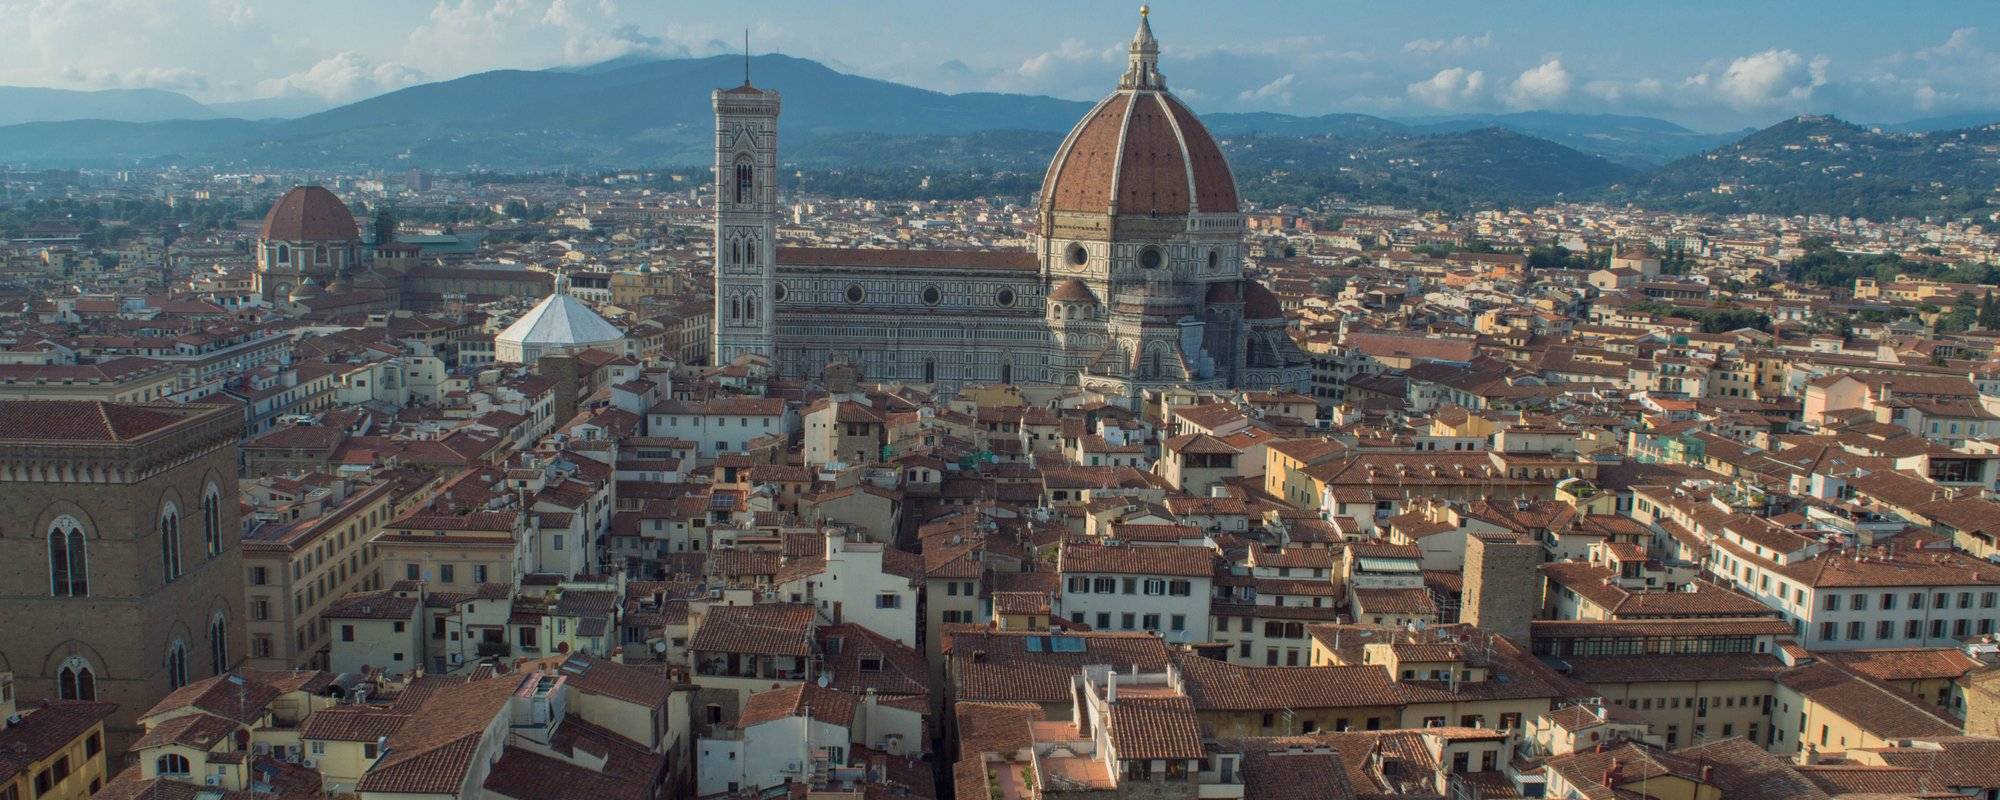 Travel adventures - Florence - Day 1